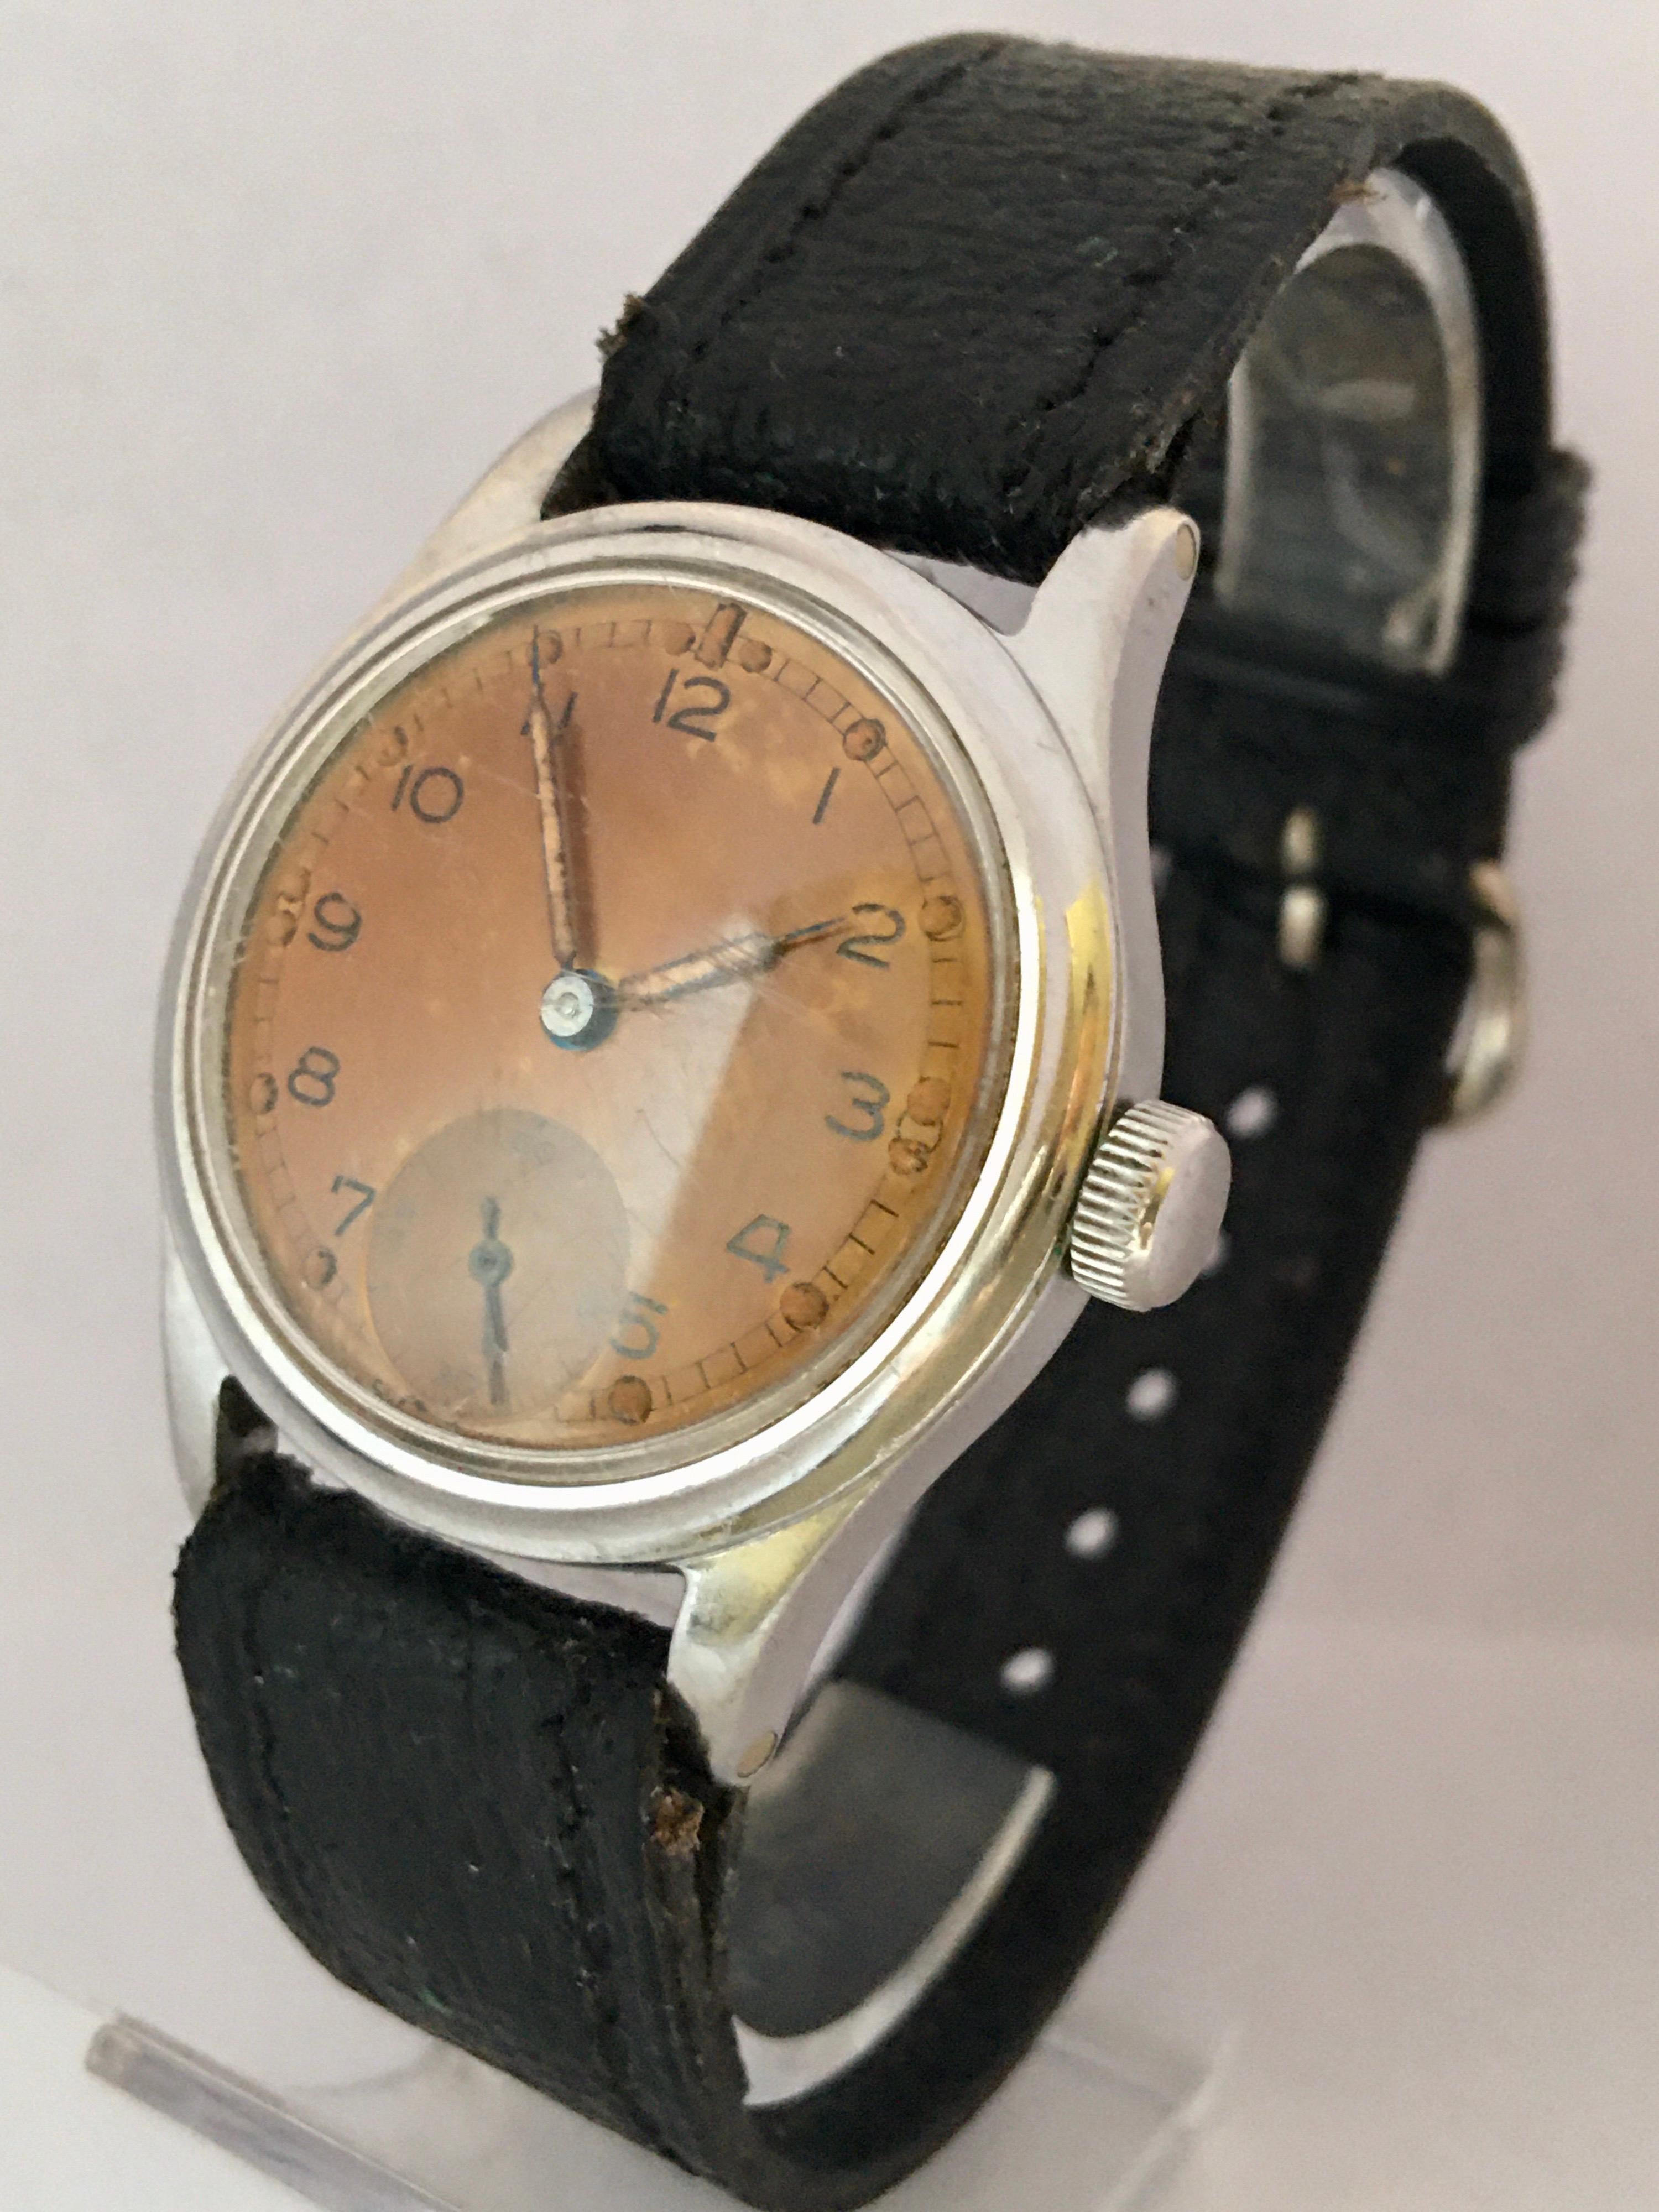 Vintage 1950s Stainless Steel Swiss Mechanical Military Watch In Good Condition For Sale In Carlisle, GB